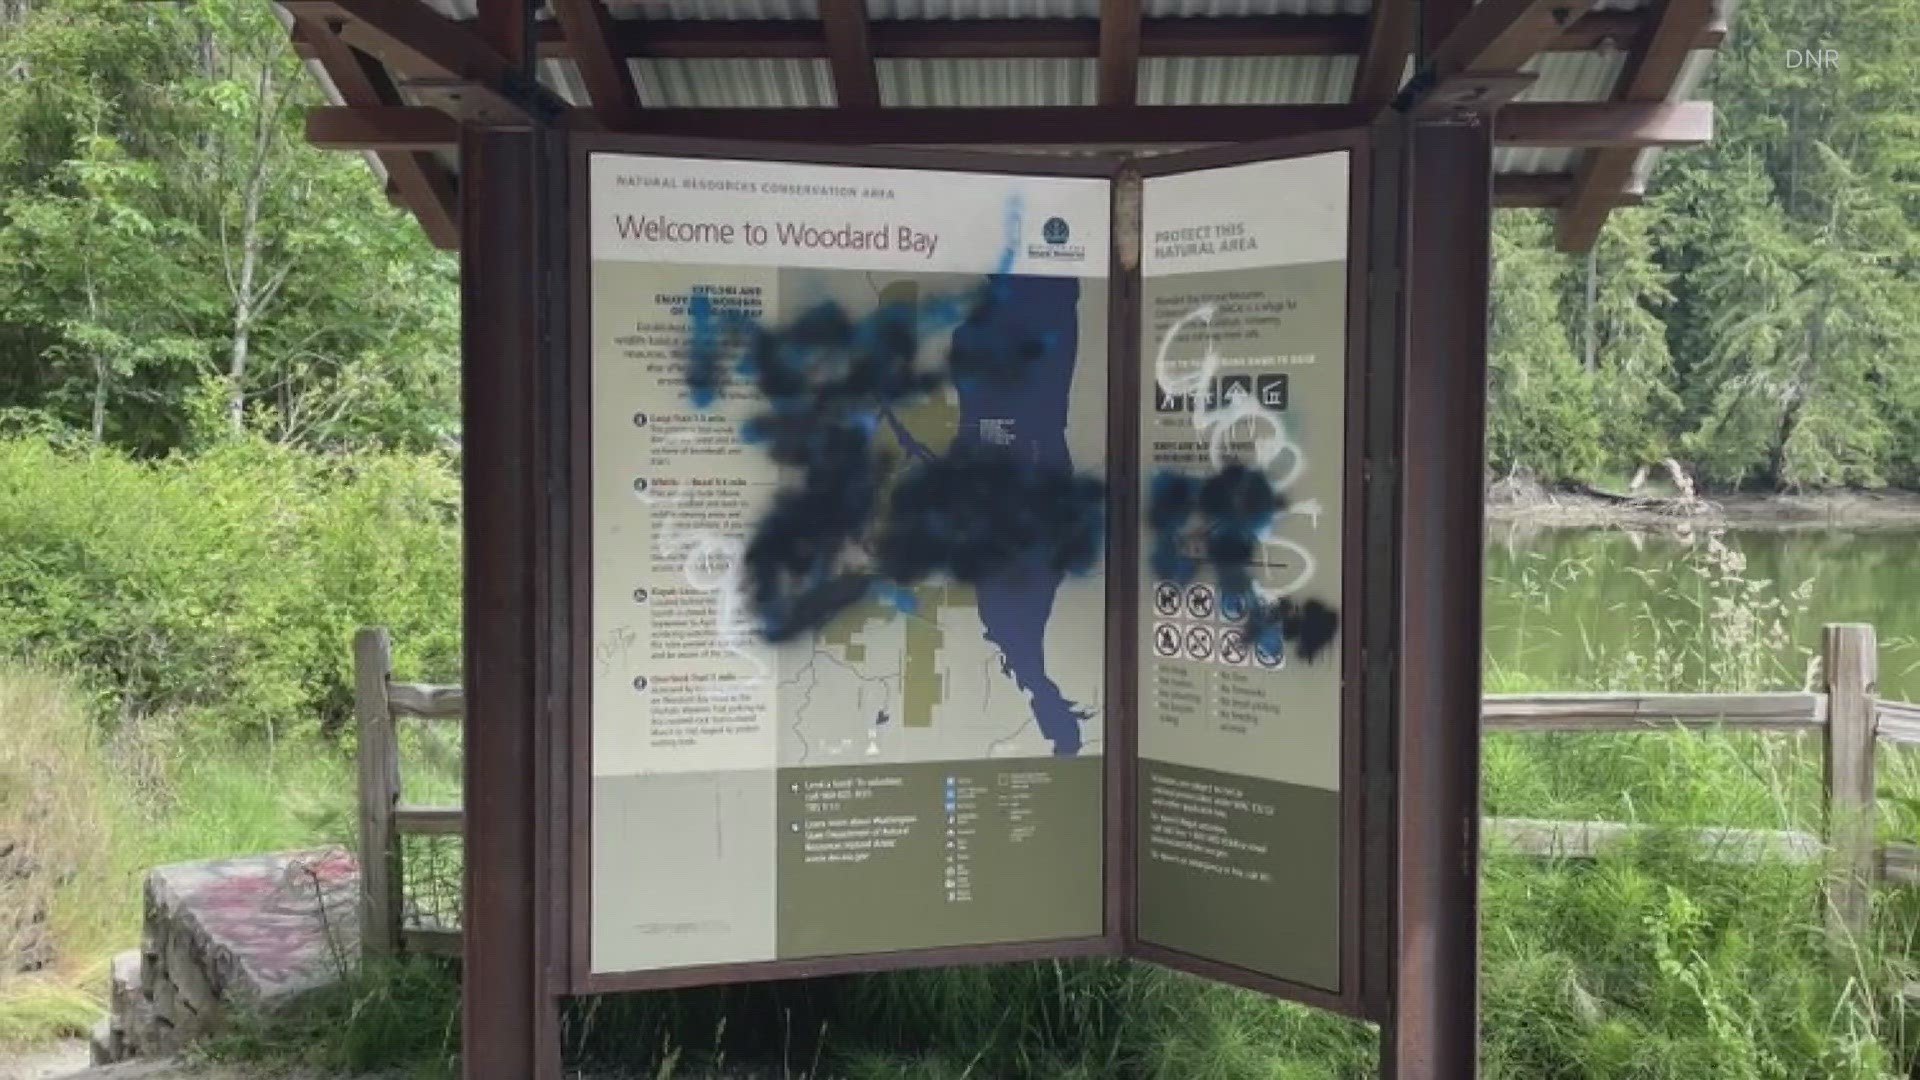 The state Department of Natural Resources says some signs at Woodard Bay conservation area in Olympia were vandalized with hateful images and words on Sunday